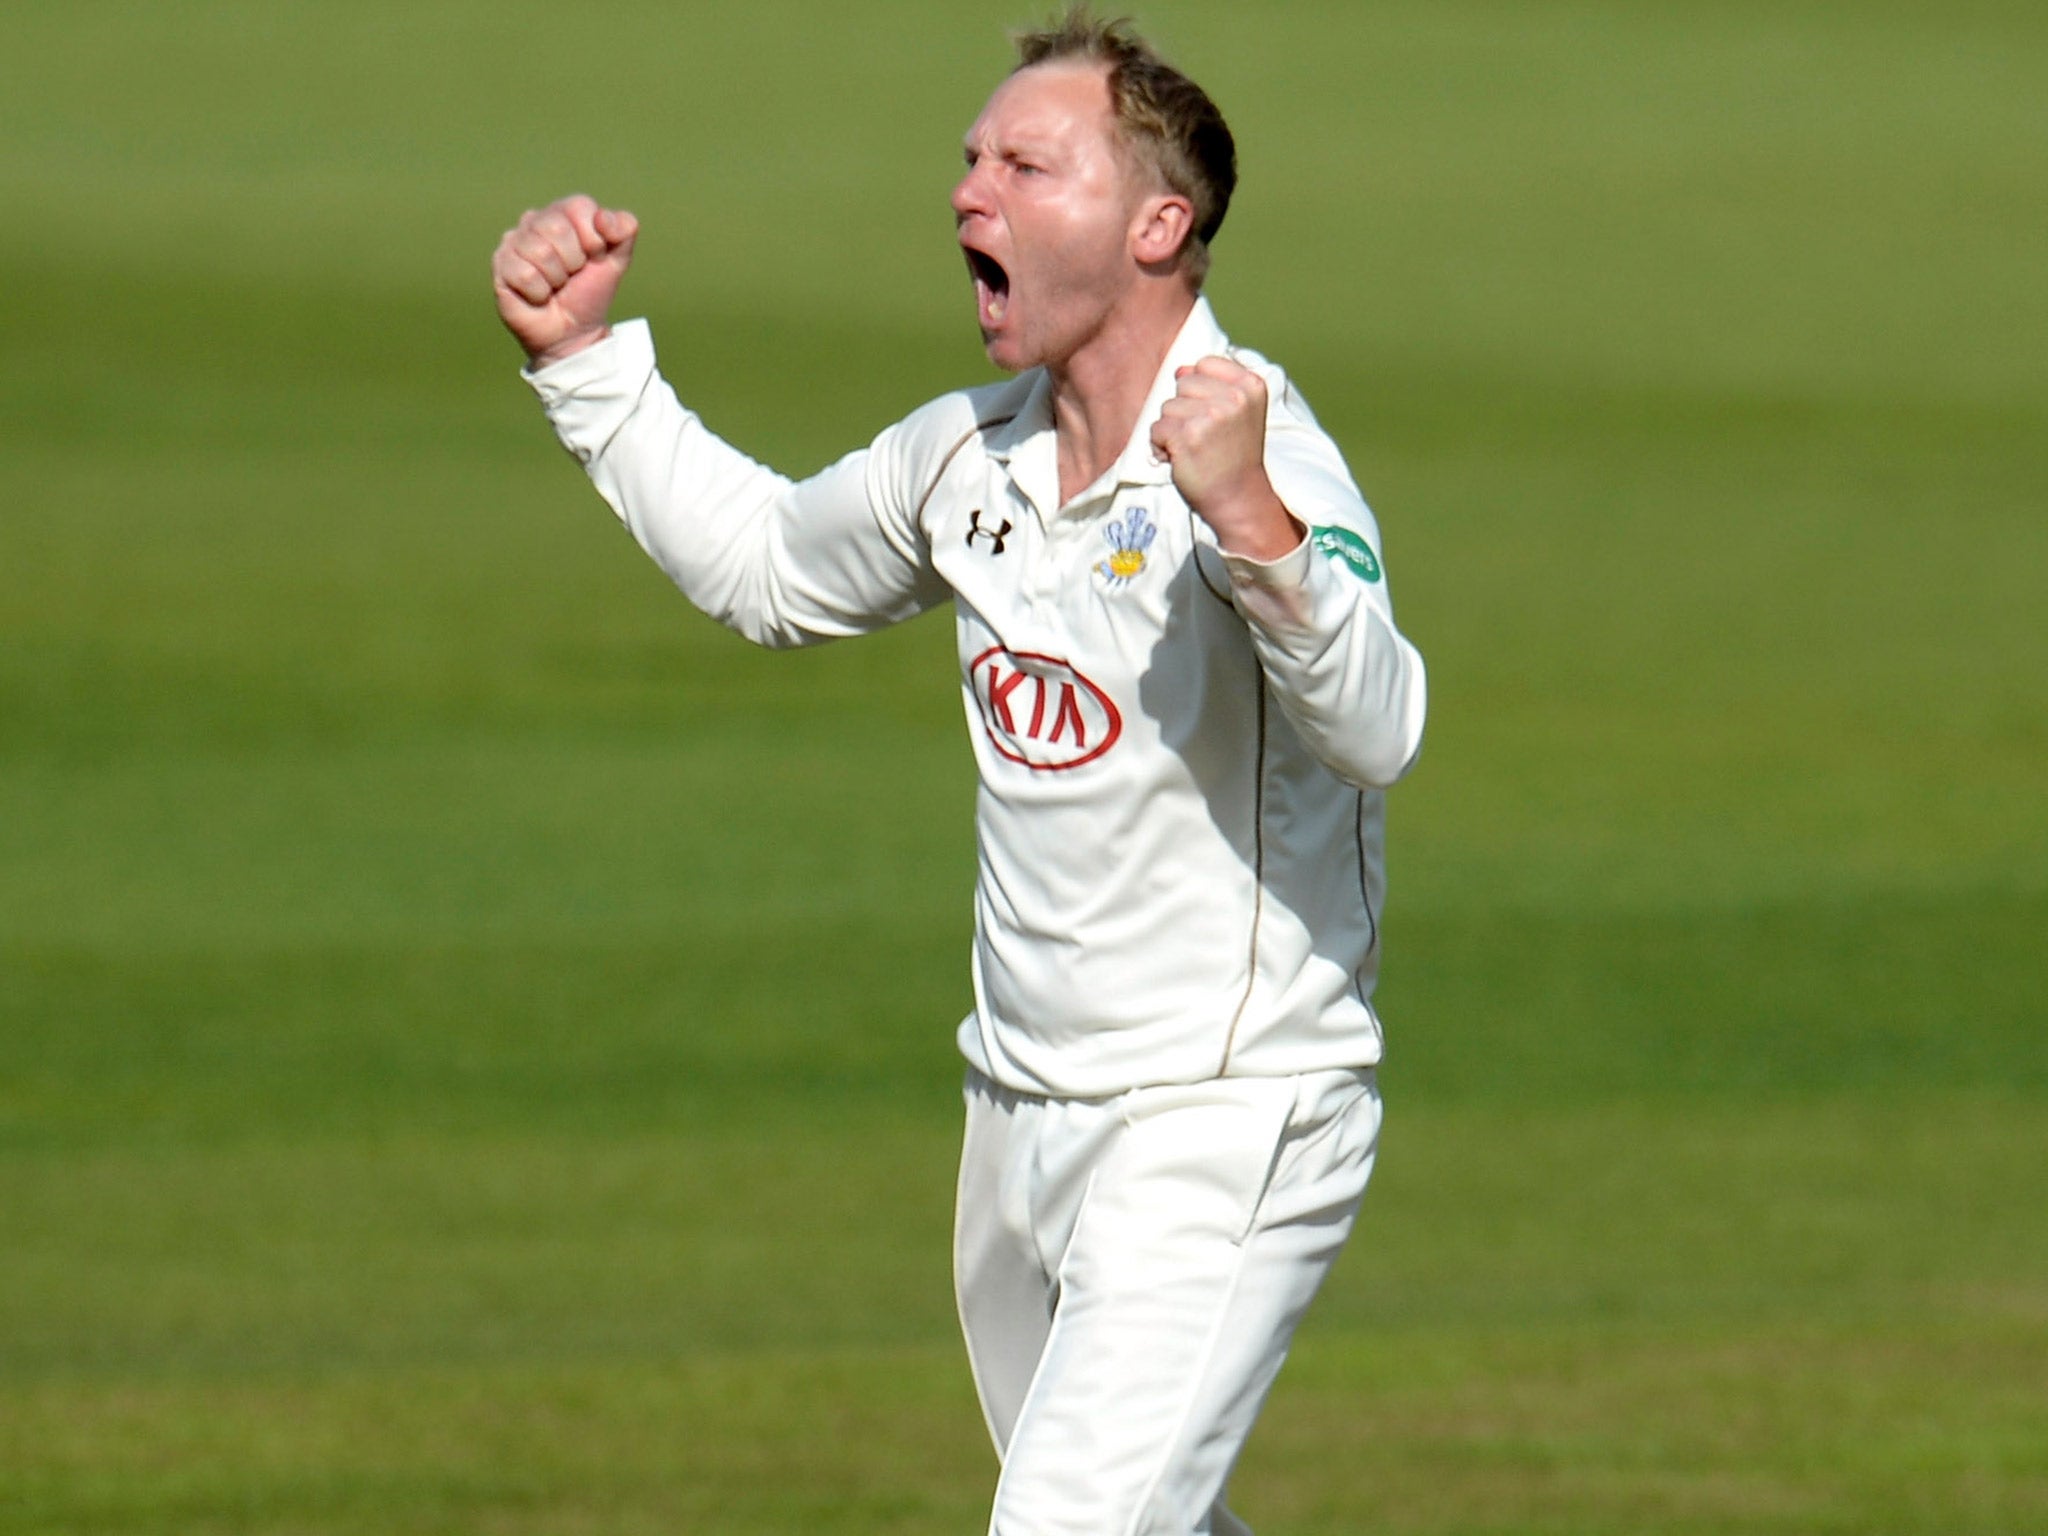 Gareth Batty has been recalled to the England Test squad after an 11-year exile